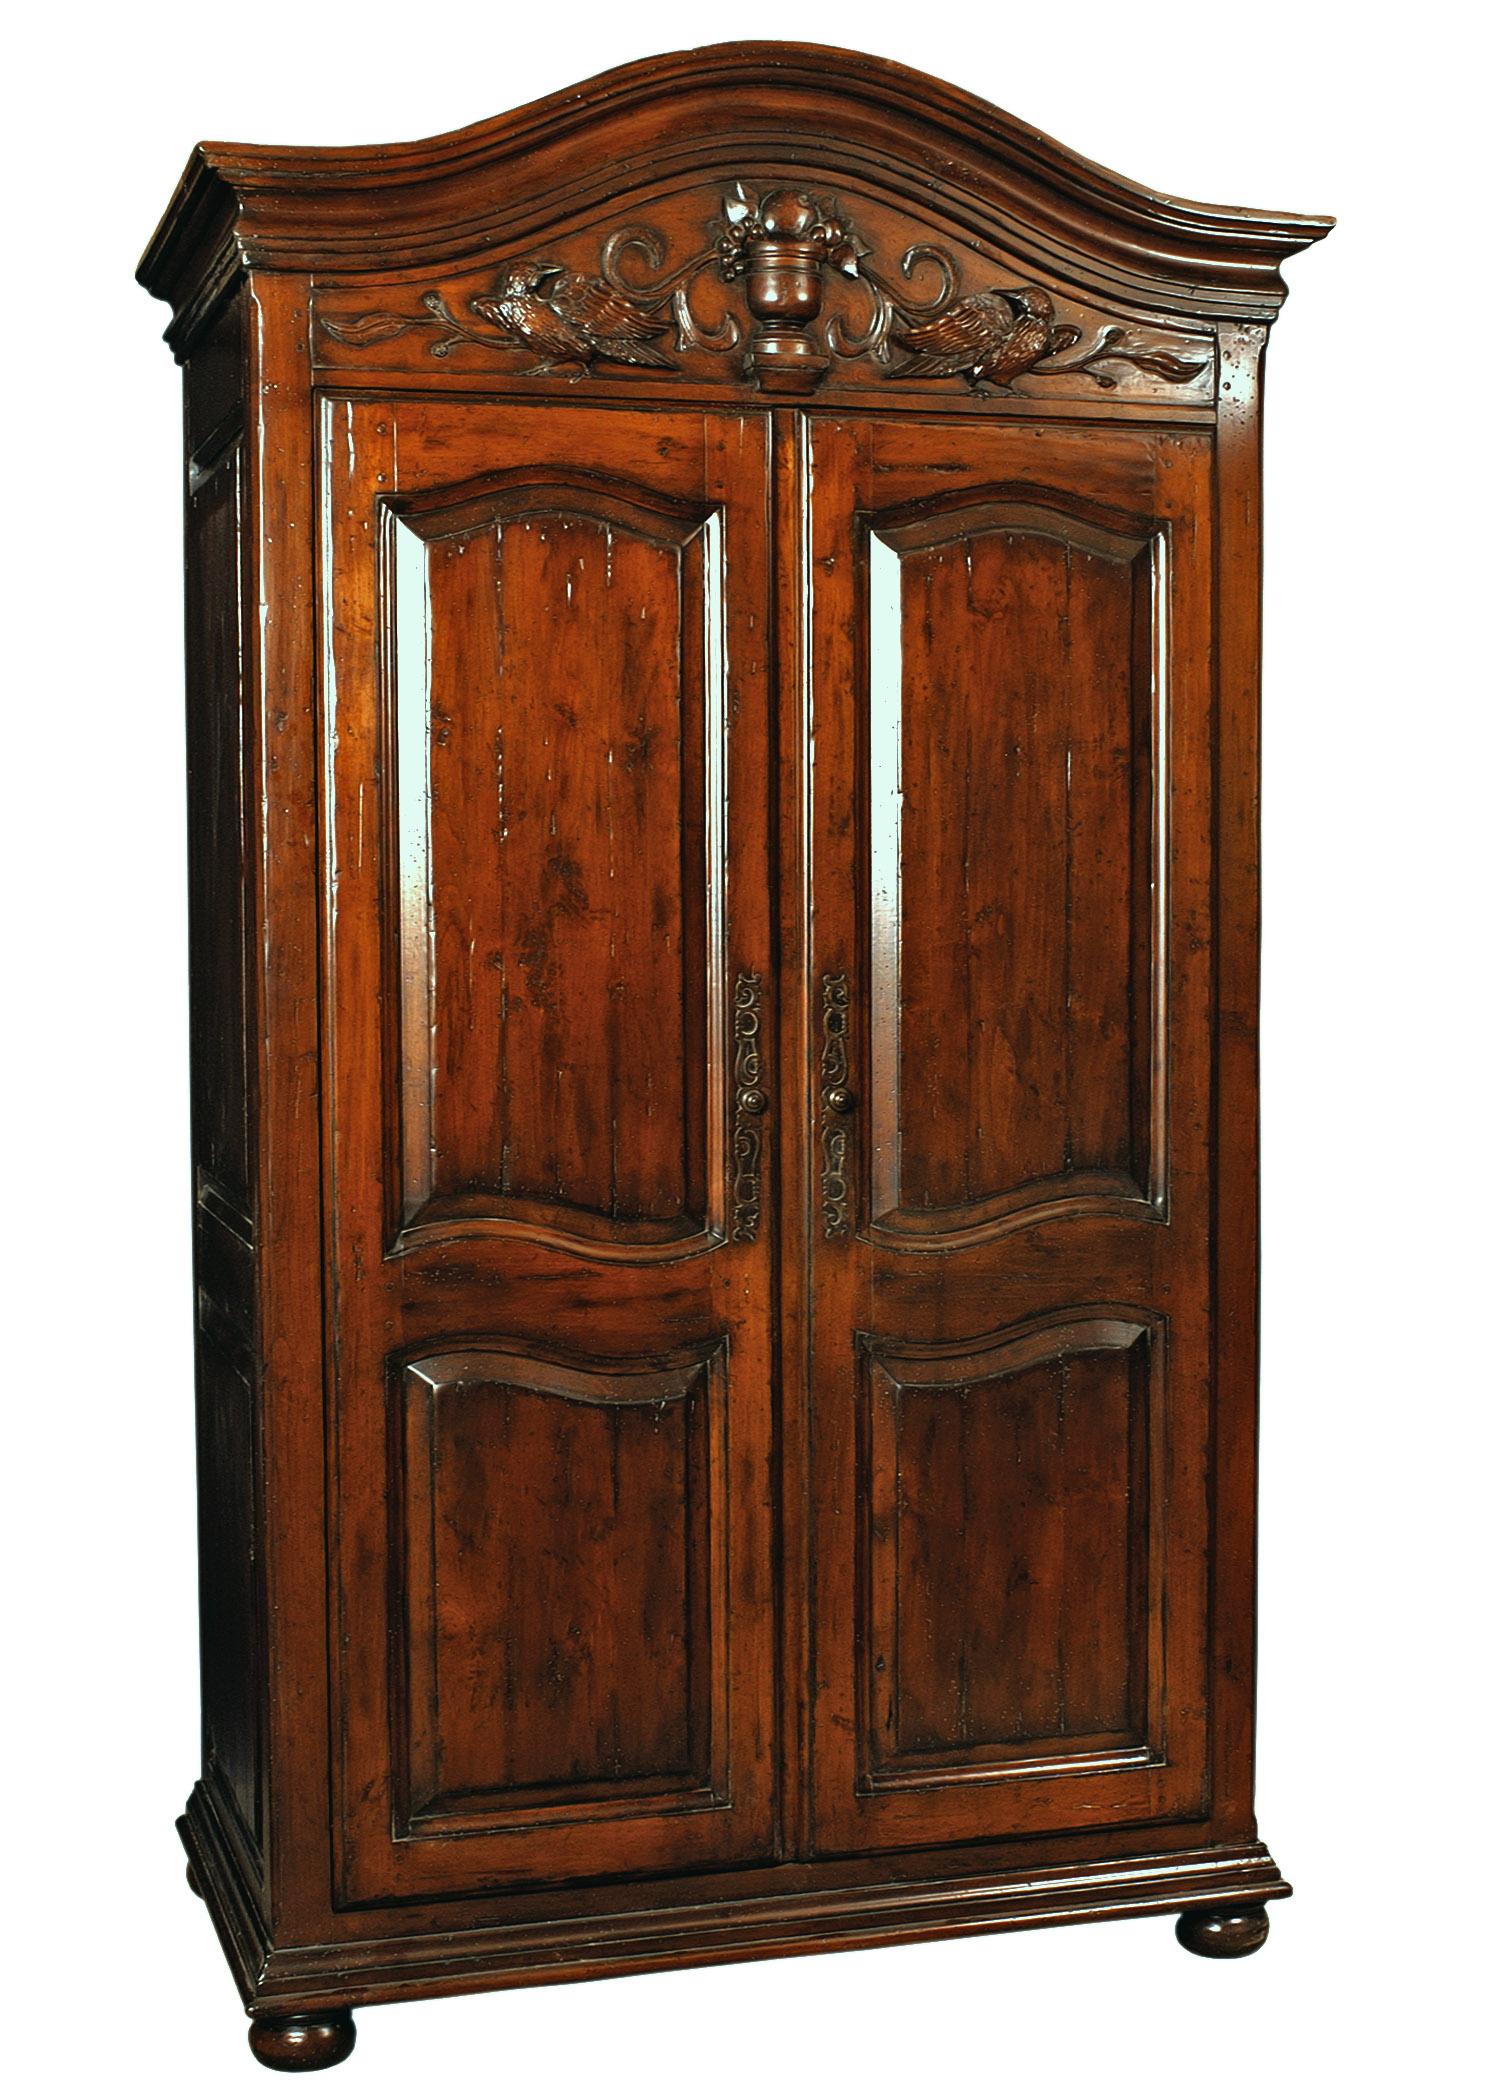 Danielle traditional armoire cabinet with carved bird motif by Woodland furniture in Idaho Falls